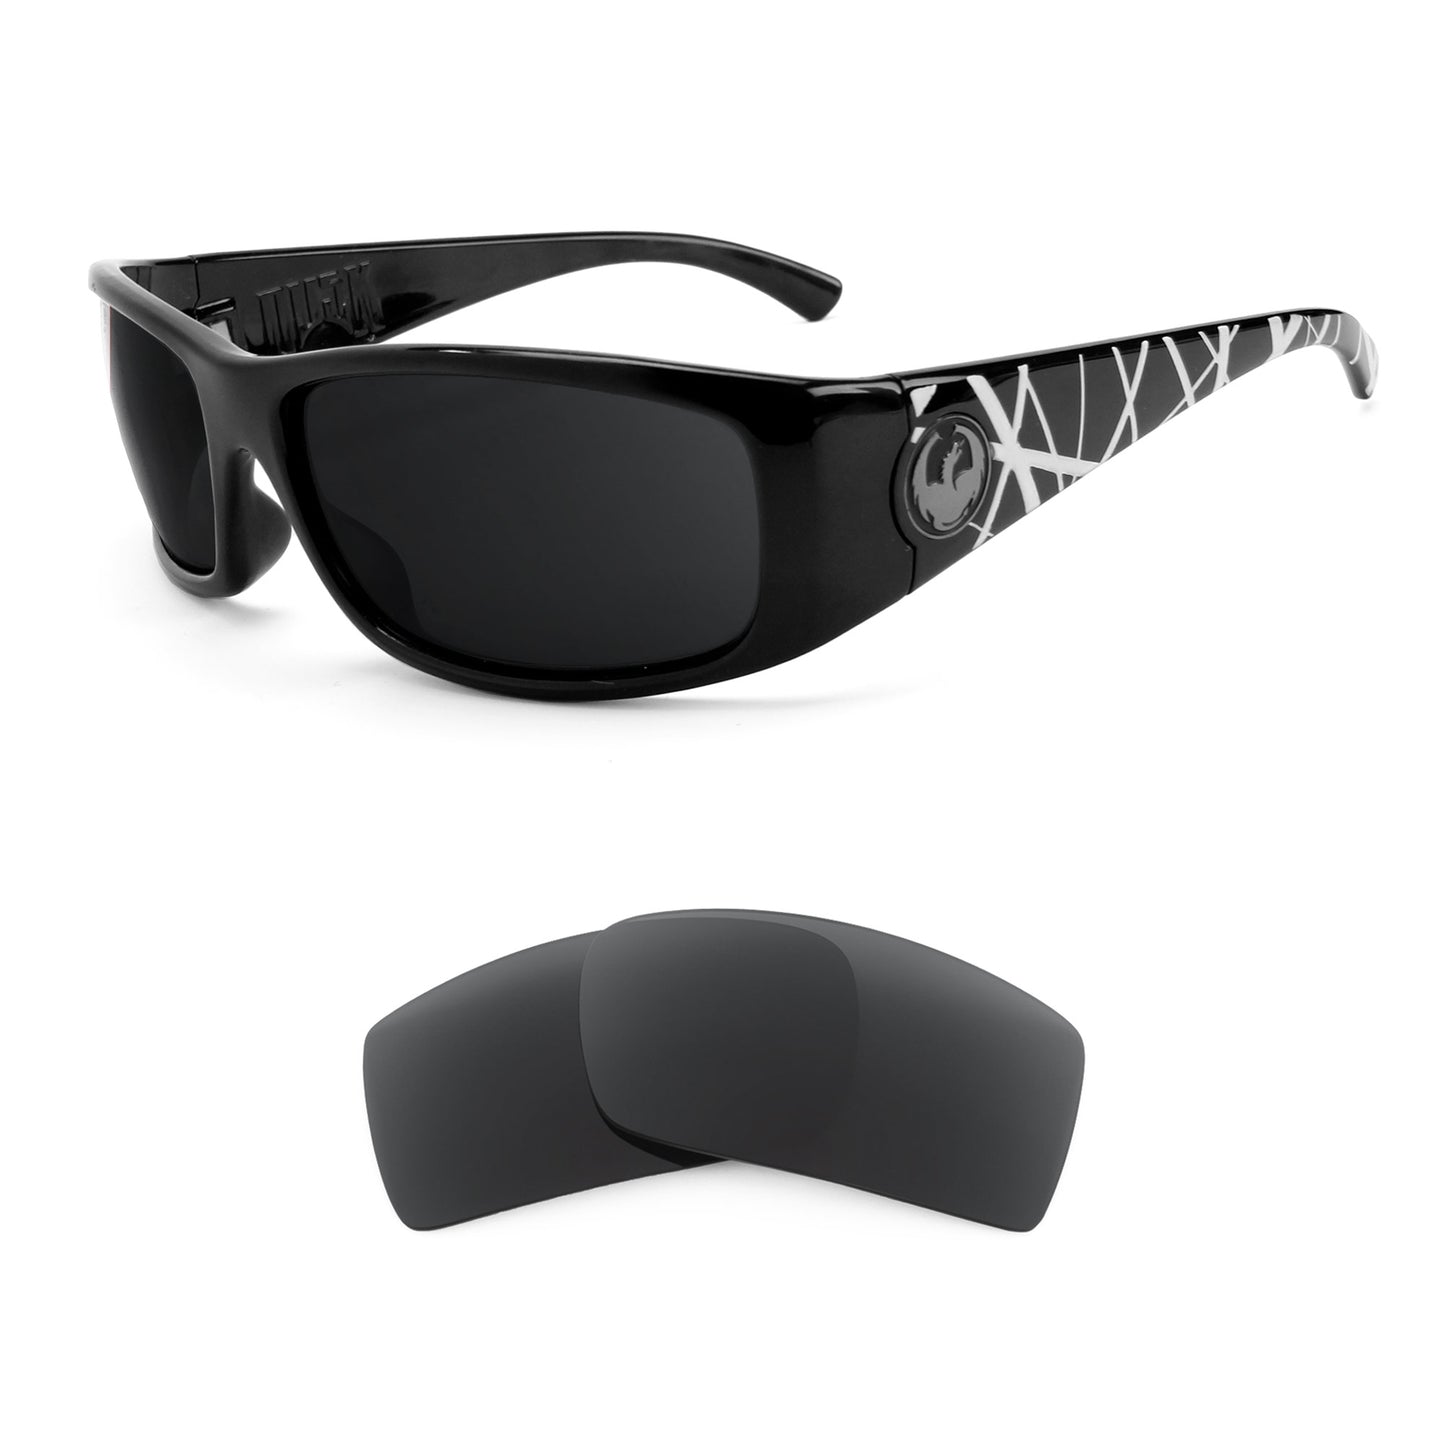 Dragon Dusk sunglasses with replacement lenses